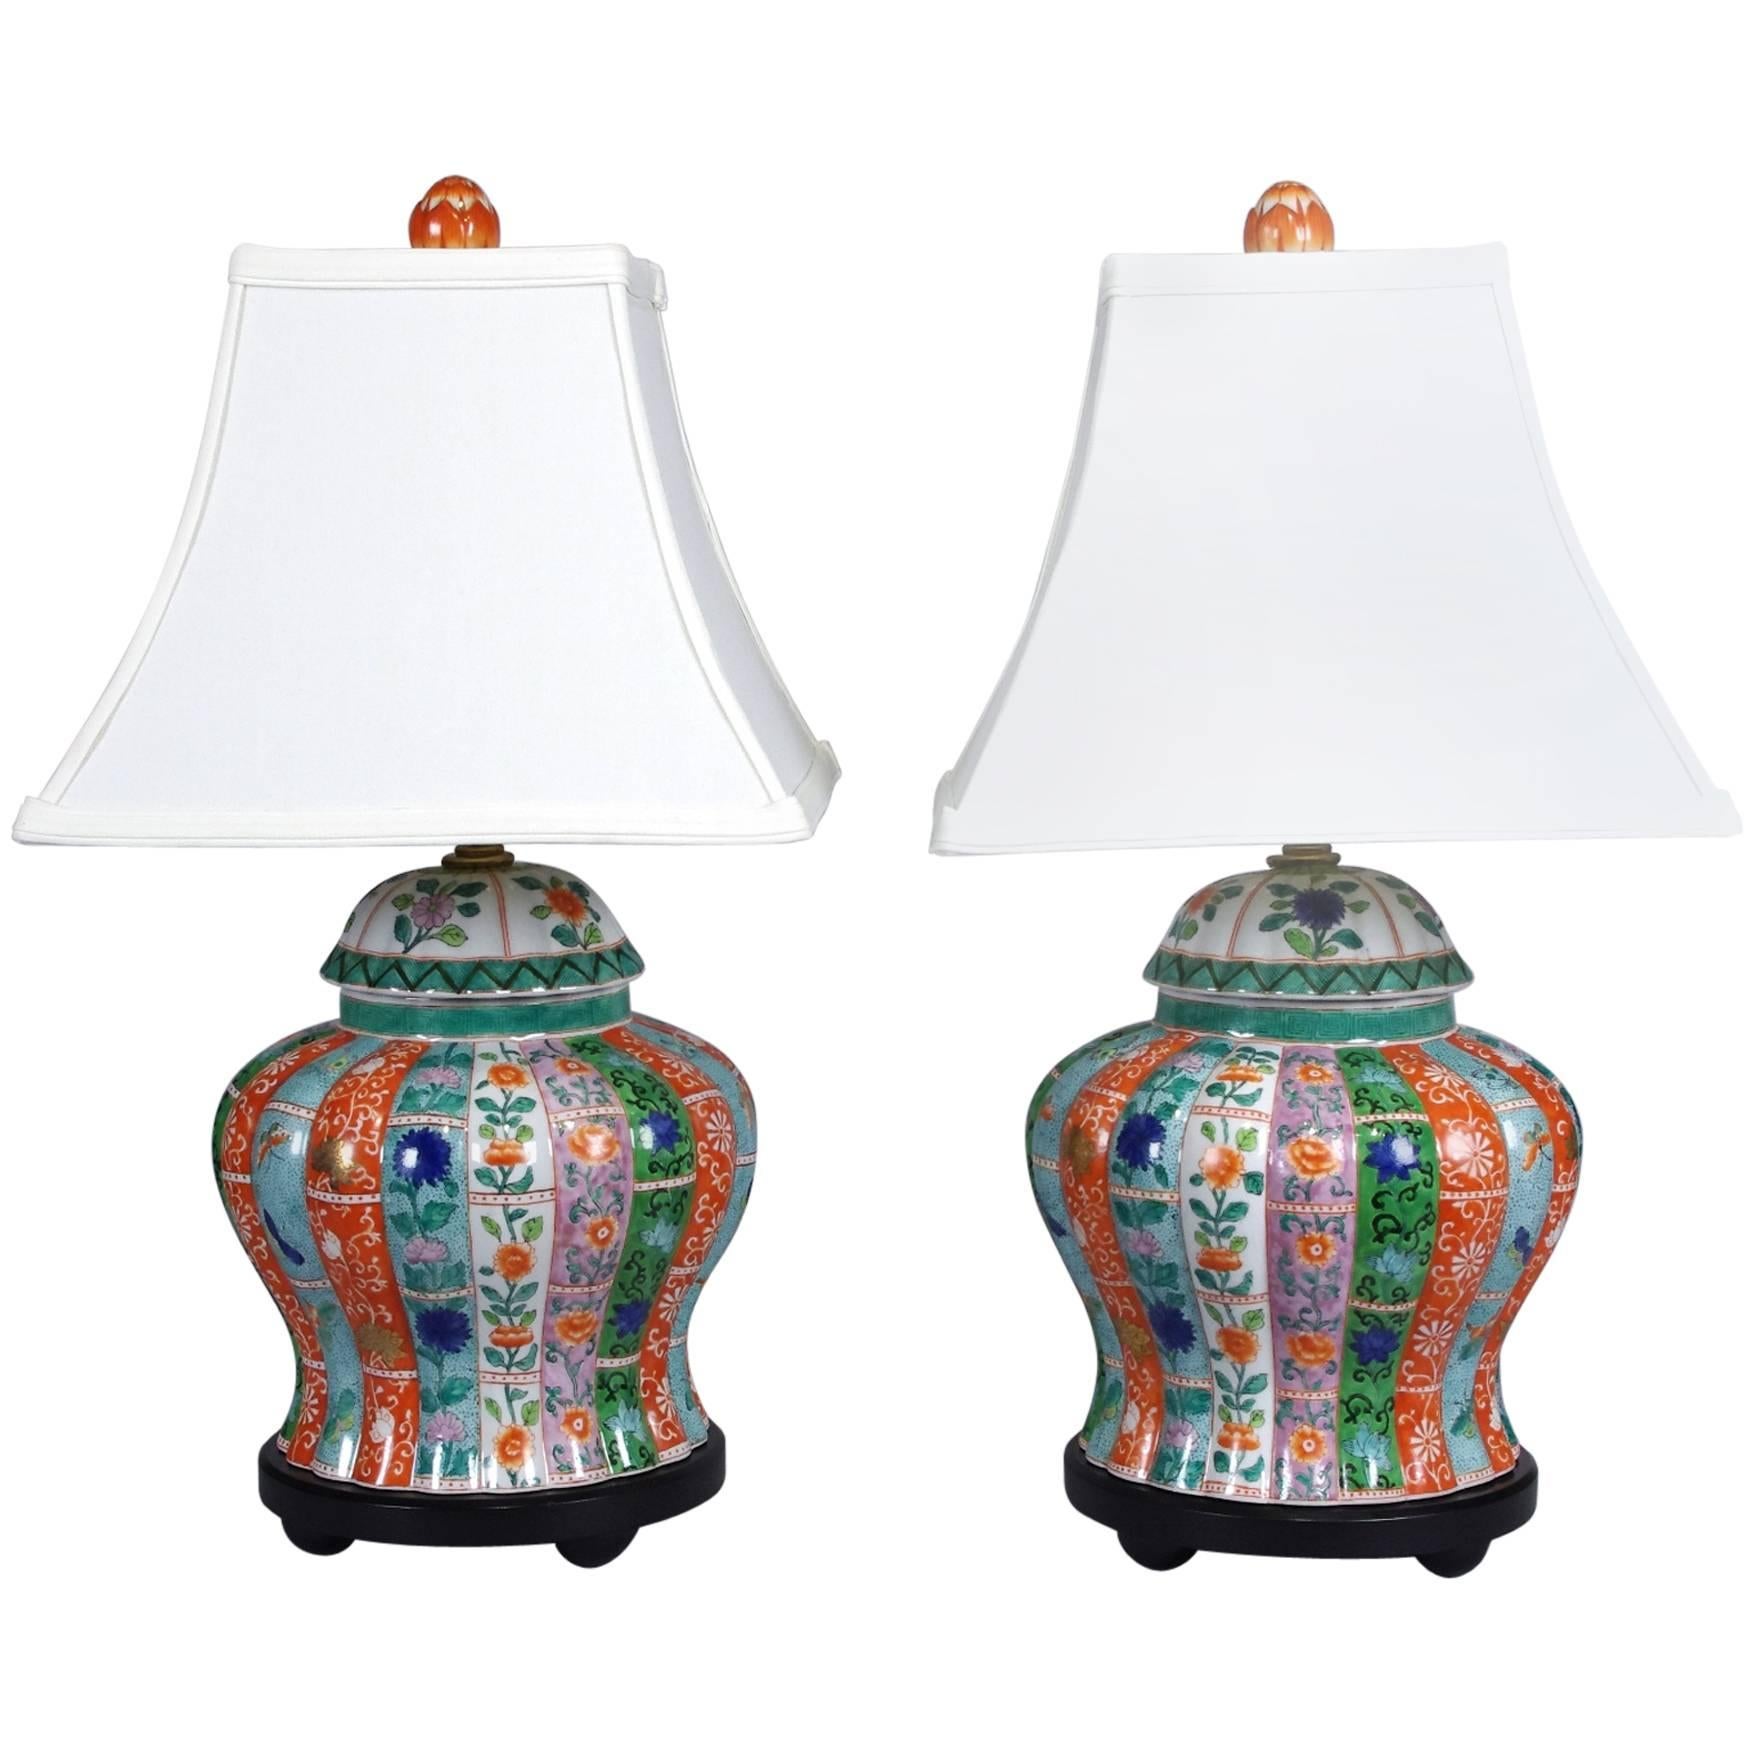 Pair of Chinese Ginger Jars Mounted as Lamps